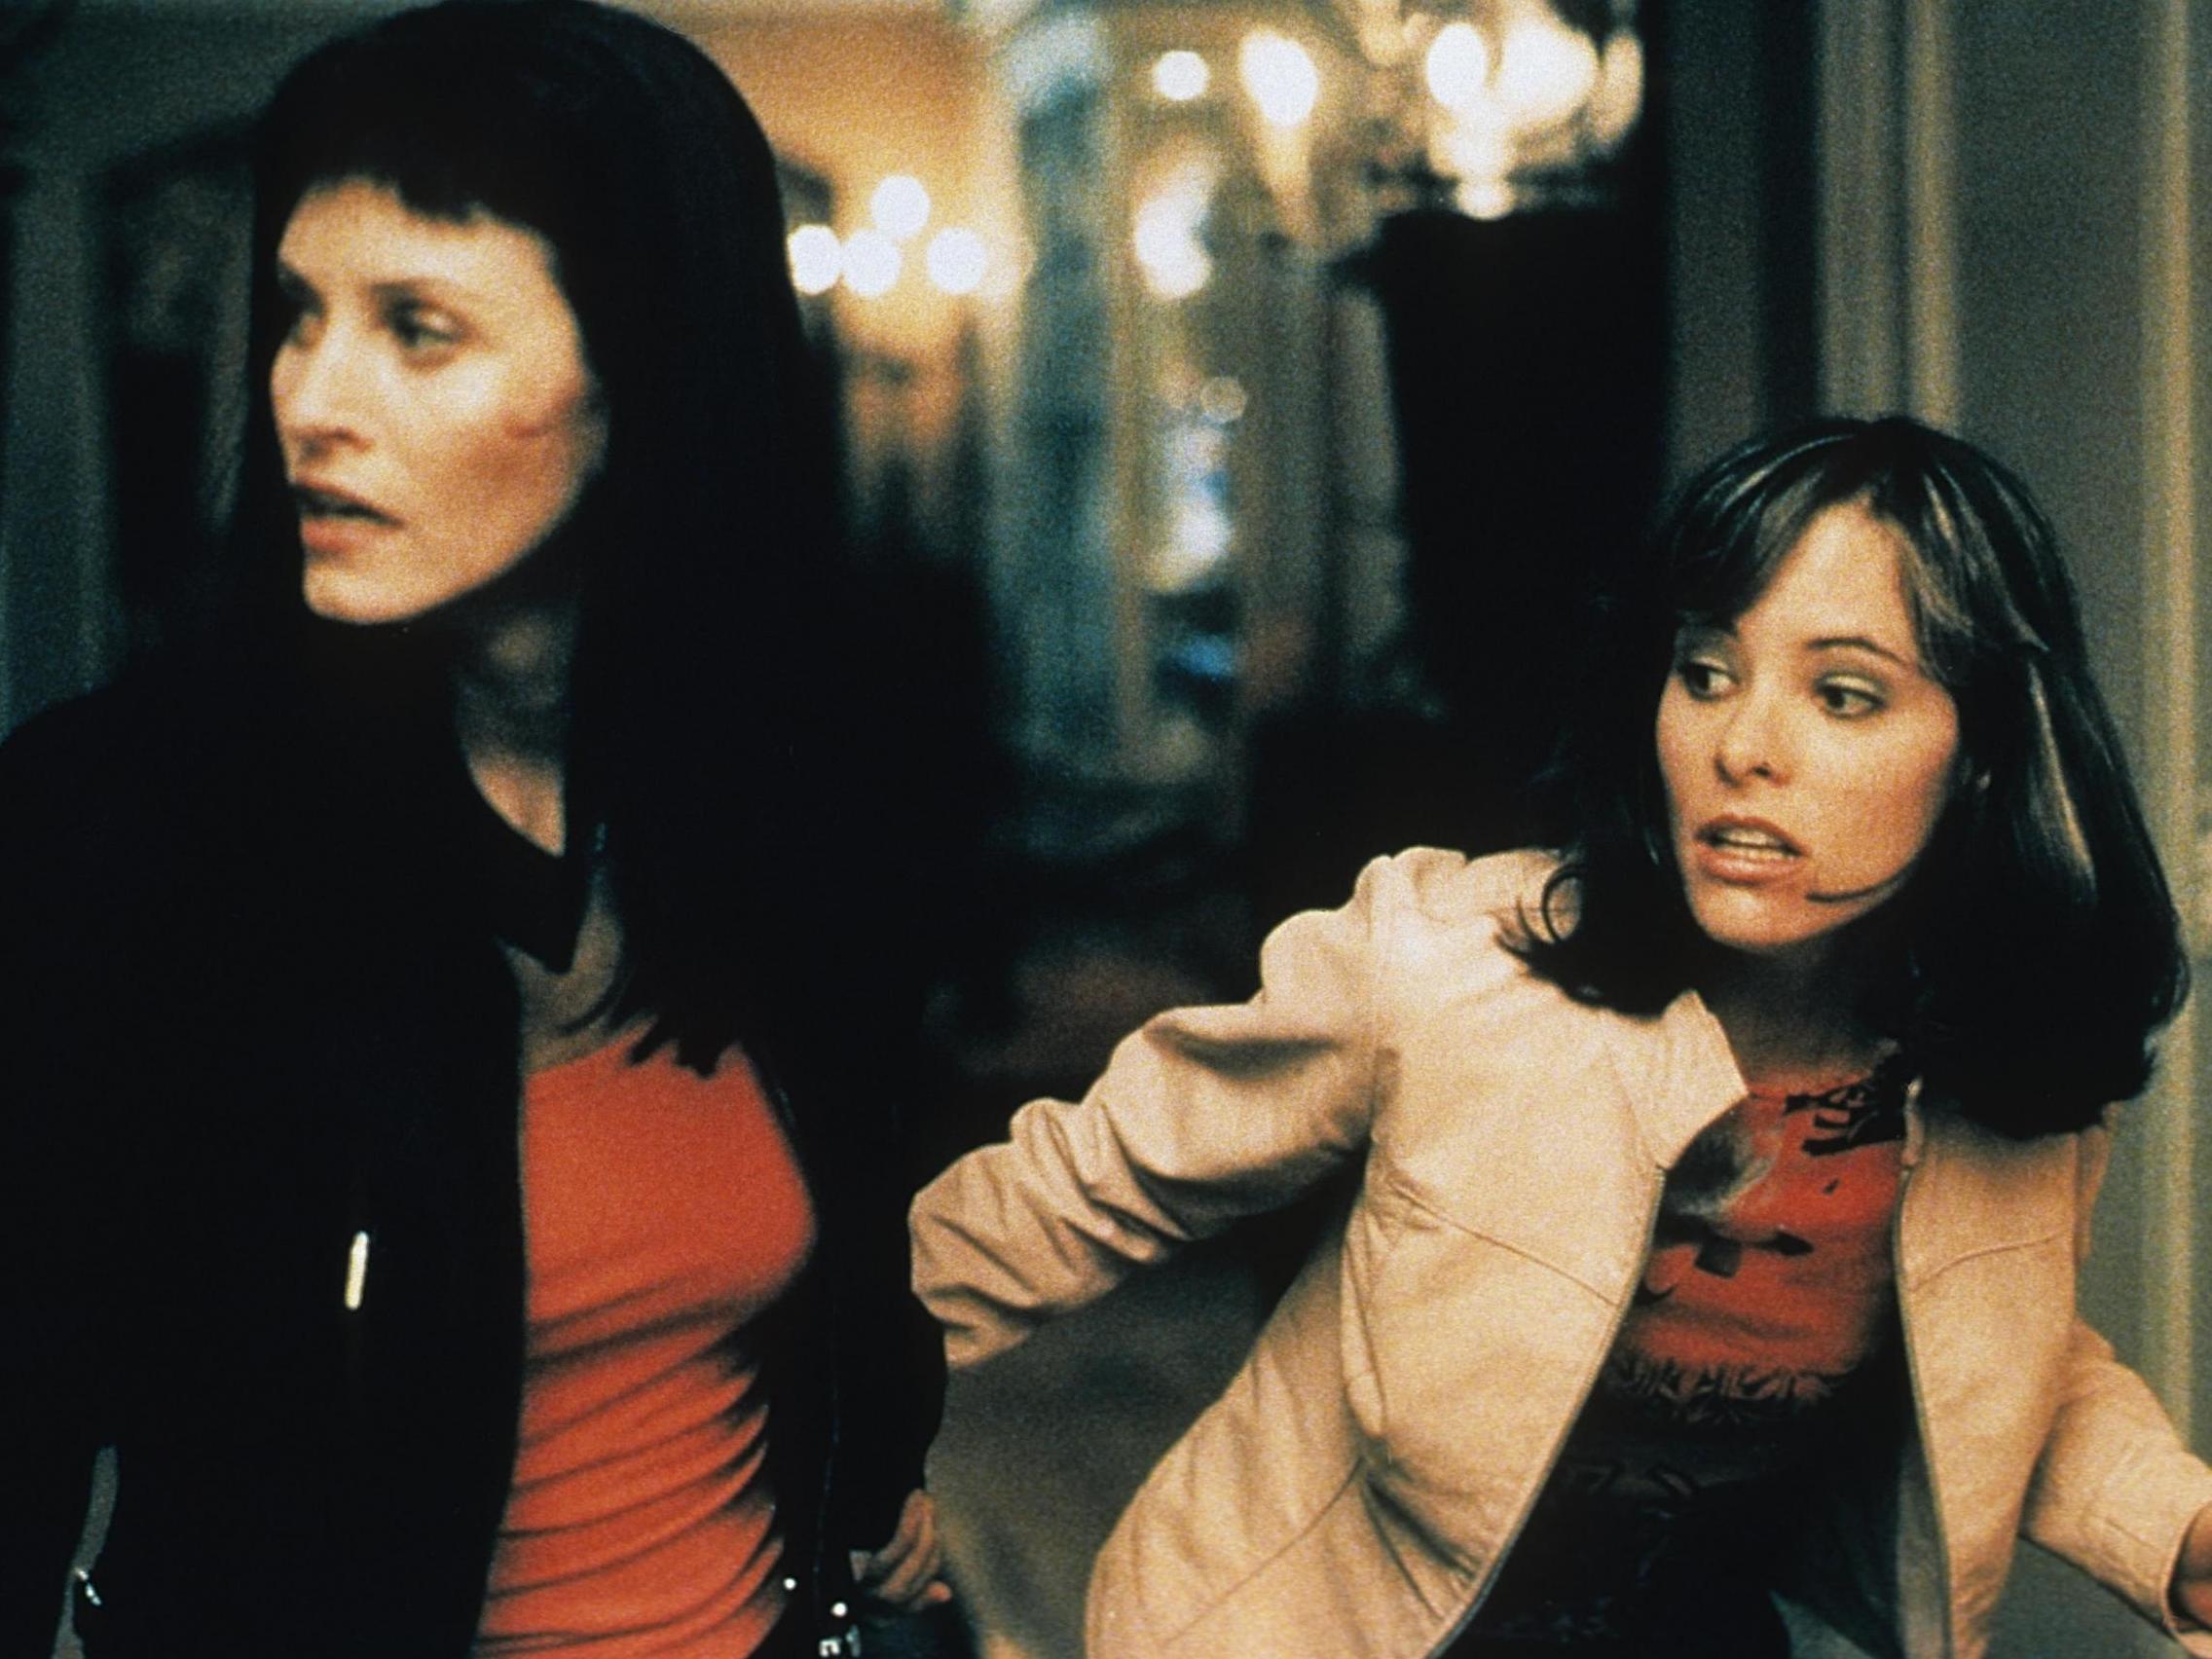 A weary cynicism about creativity and fame: Courteney Cox and Parker Posey in ‘Scream 3’